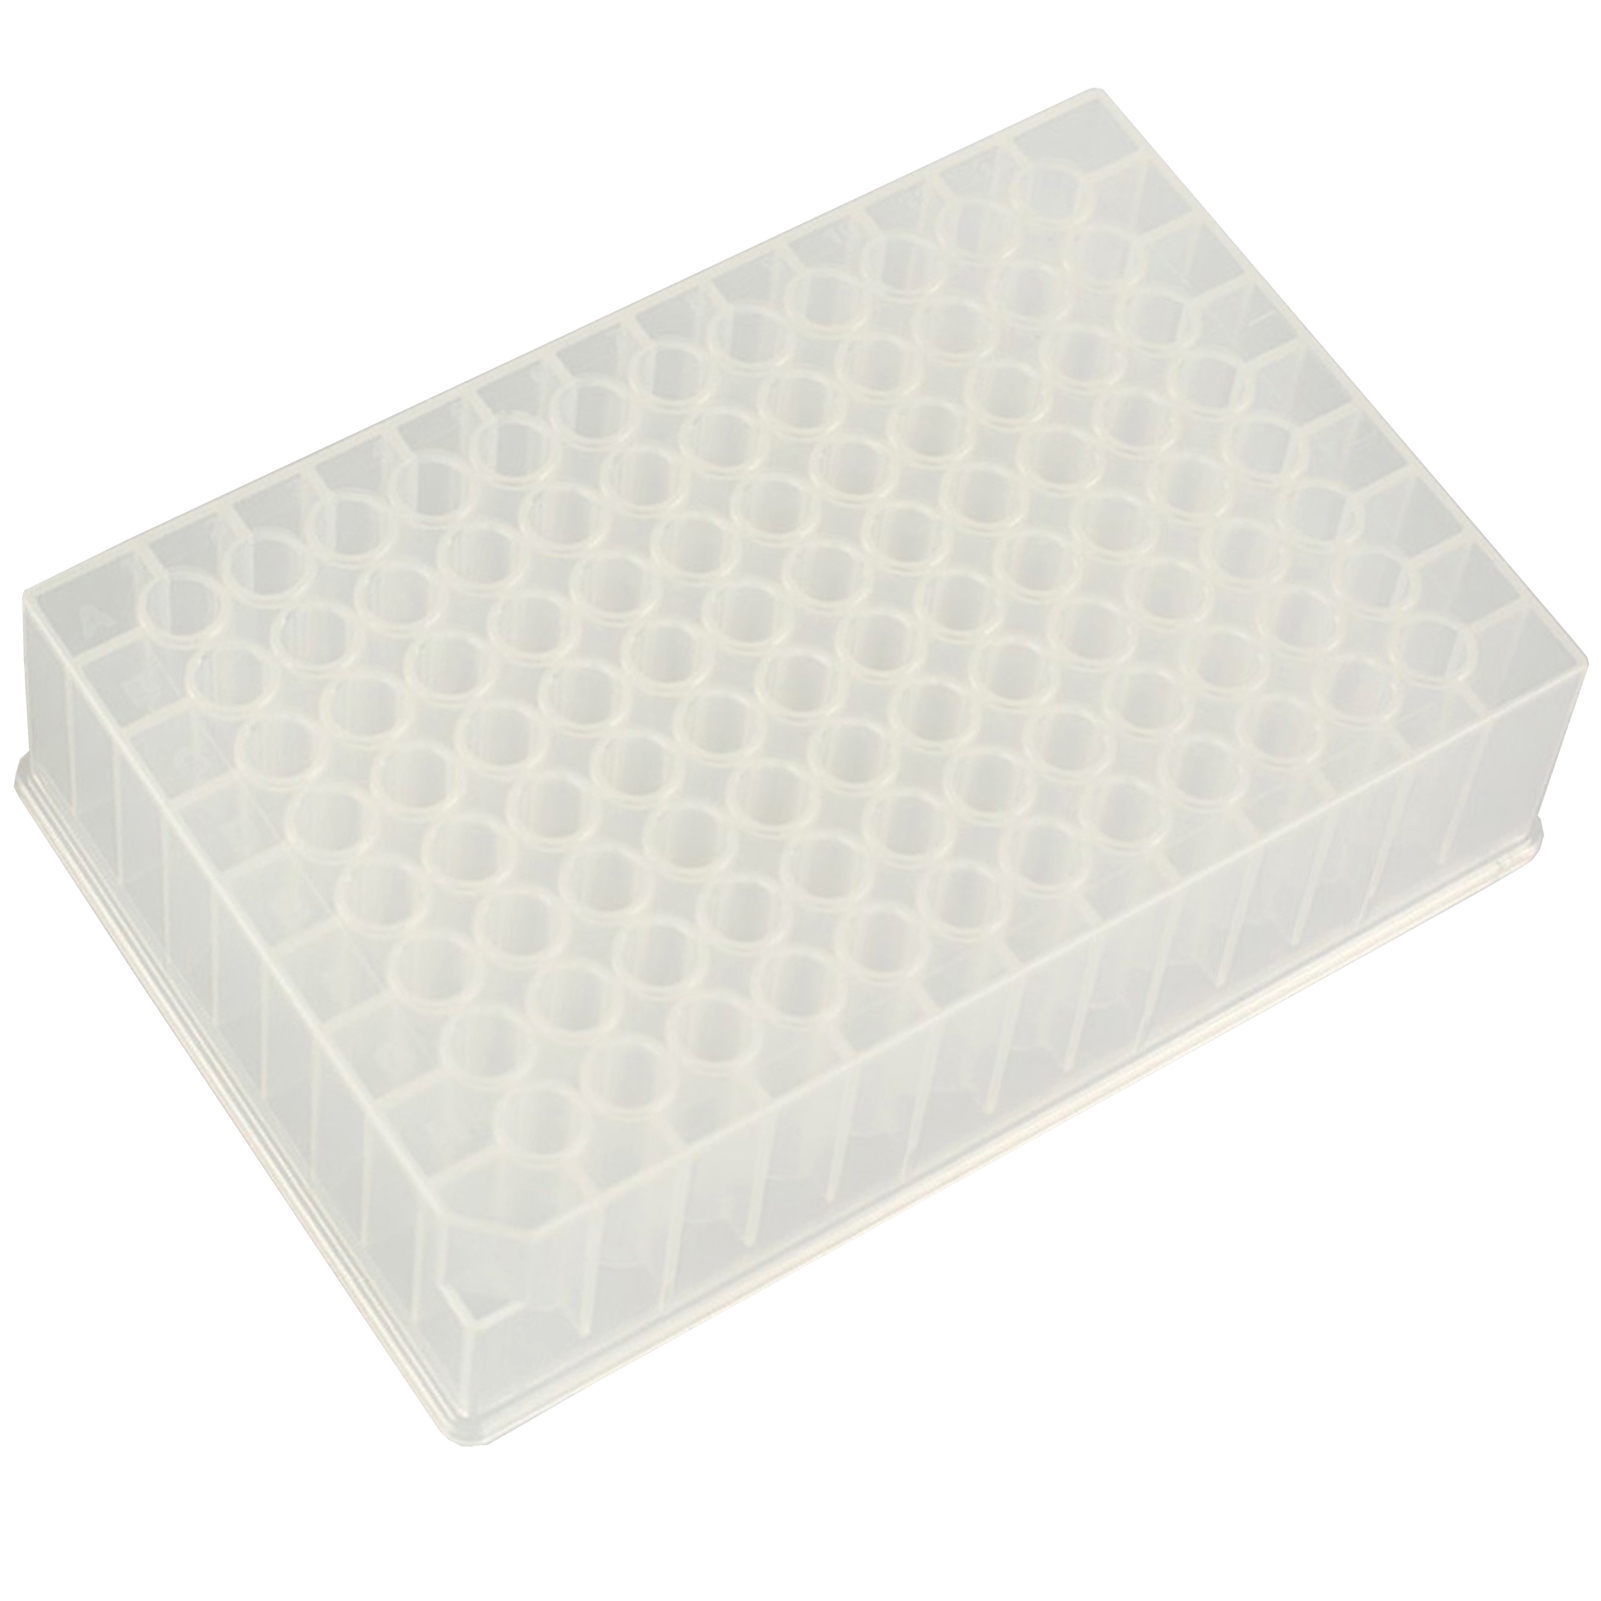 ADAMAS BETA Deep Hole Plate Laboratory Supplies 96 Wells Sample Clear PP Plastic High Capacity Collect Store Bacteria Culture Plate